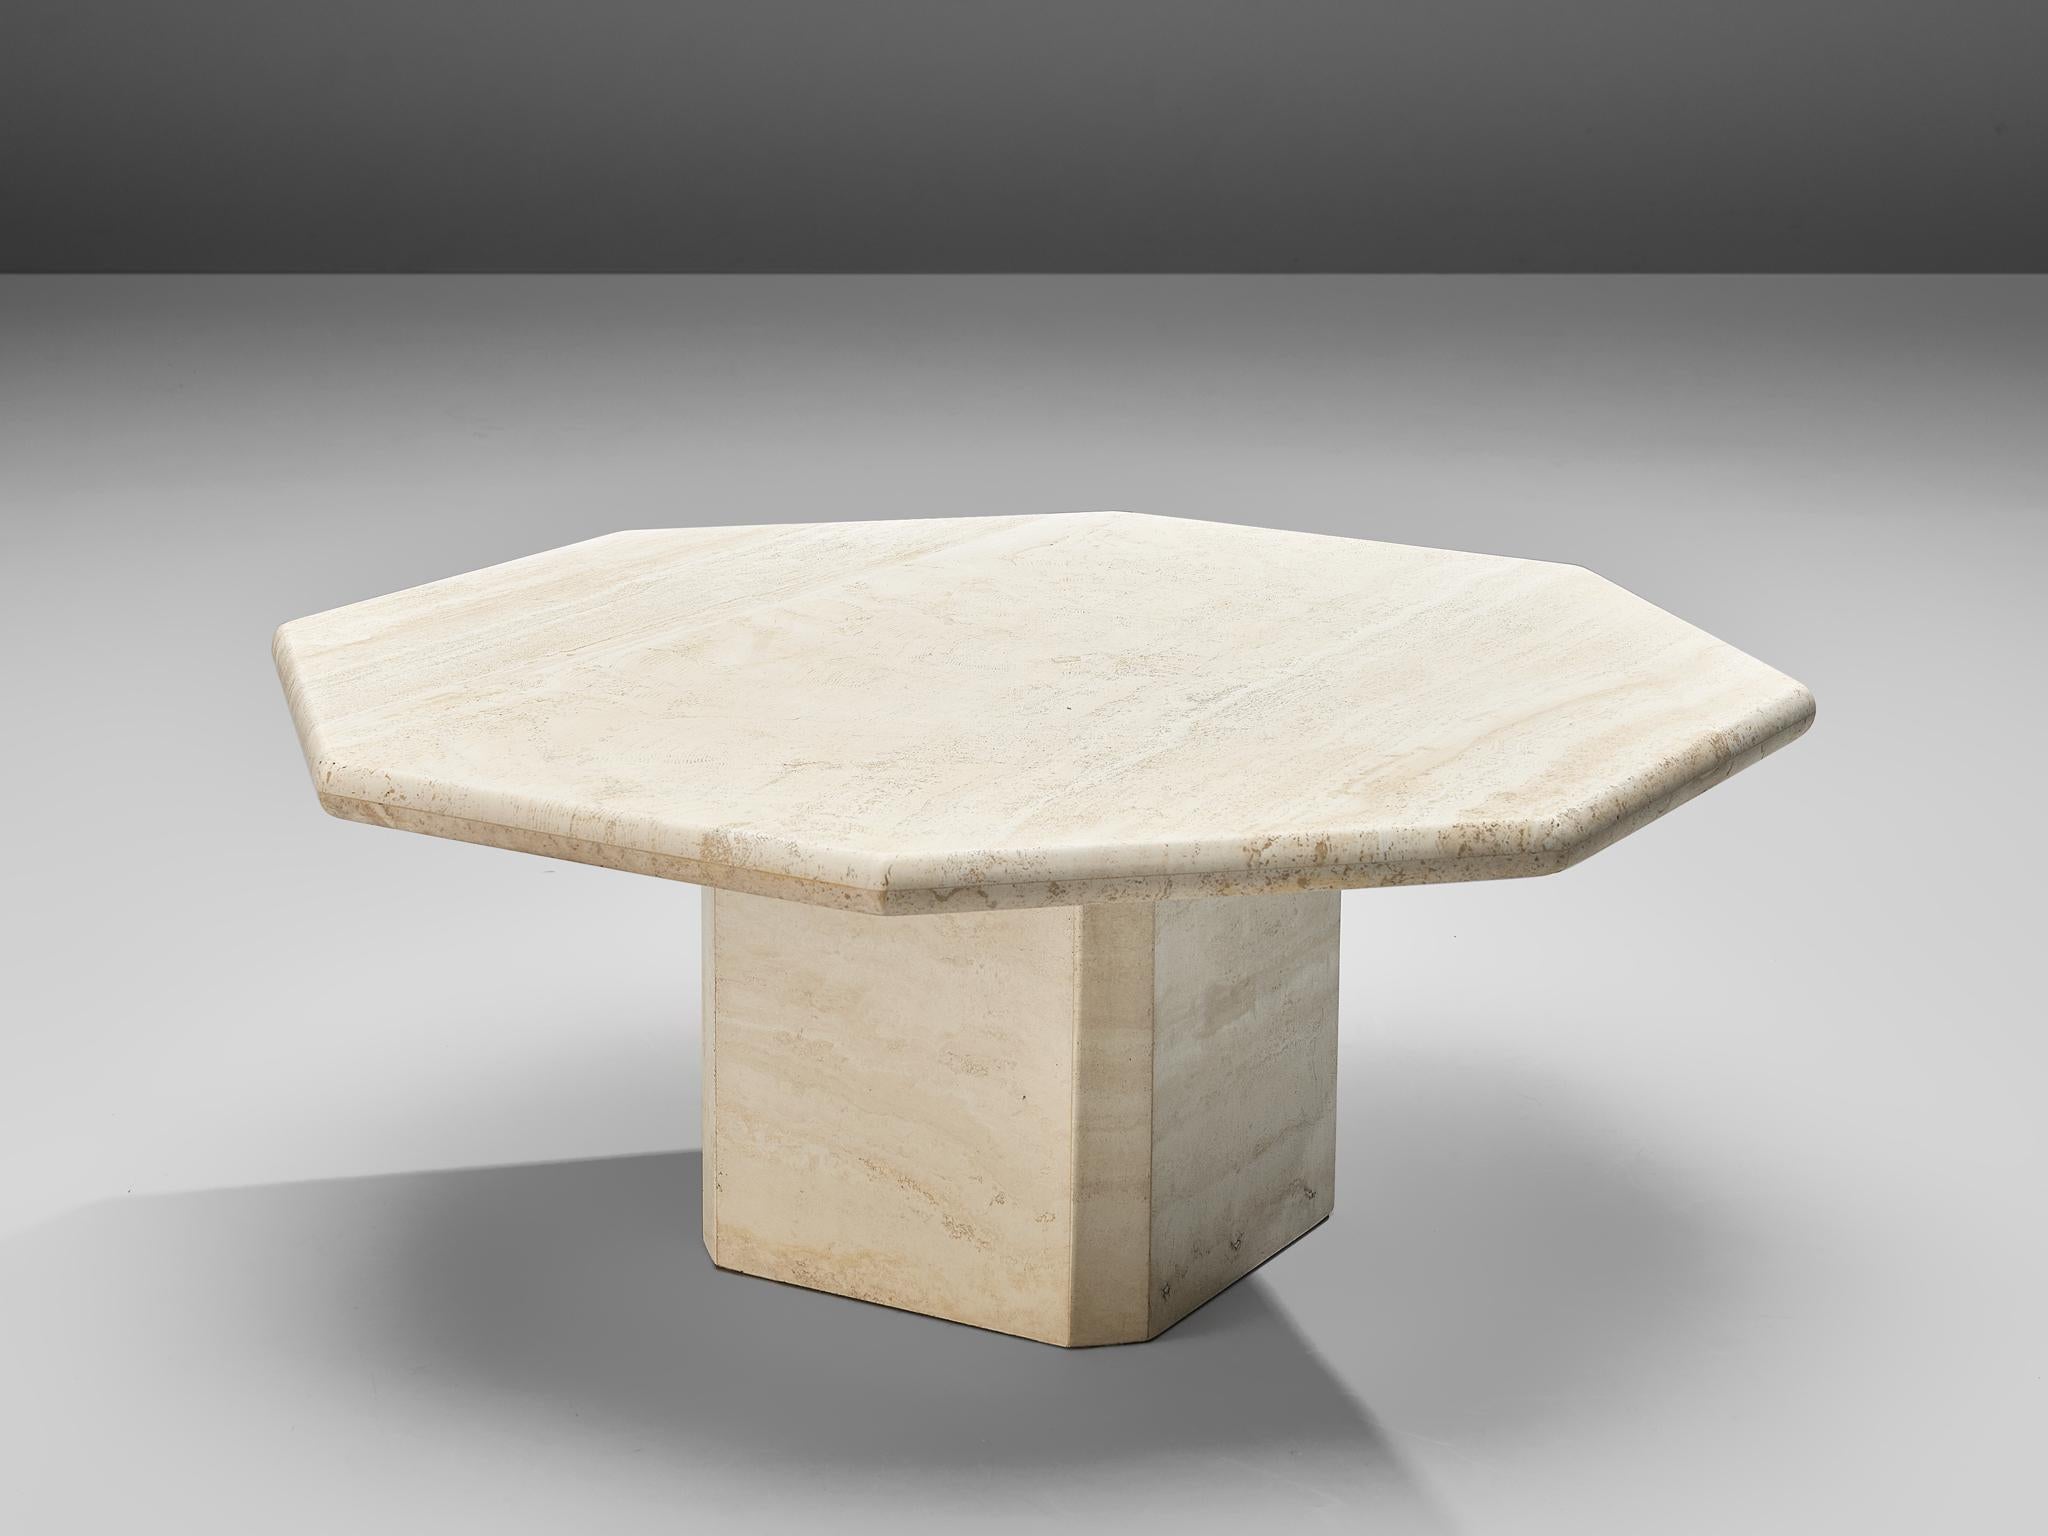 Coffee table, travertine, Europe, 1970s

This solid coffee table features an octogonal base and a thick polygonal tabletop. The bright travertine gives the table a sculptural look. The natural layers of the limestone structure the surface visually.

